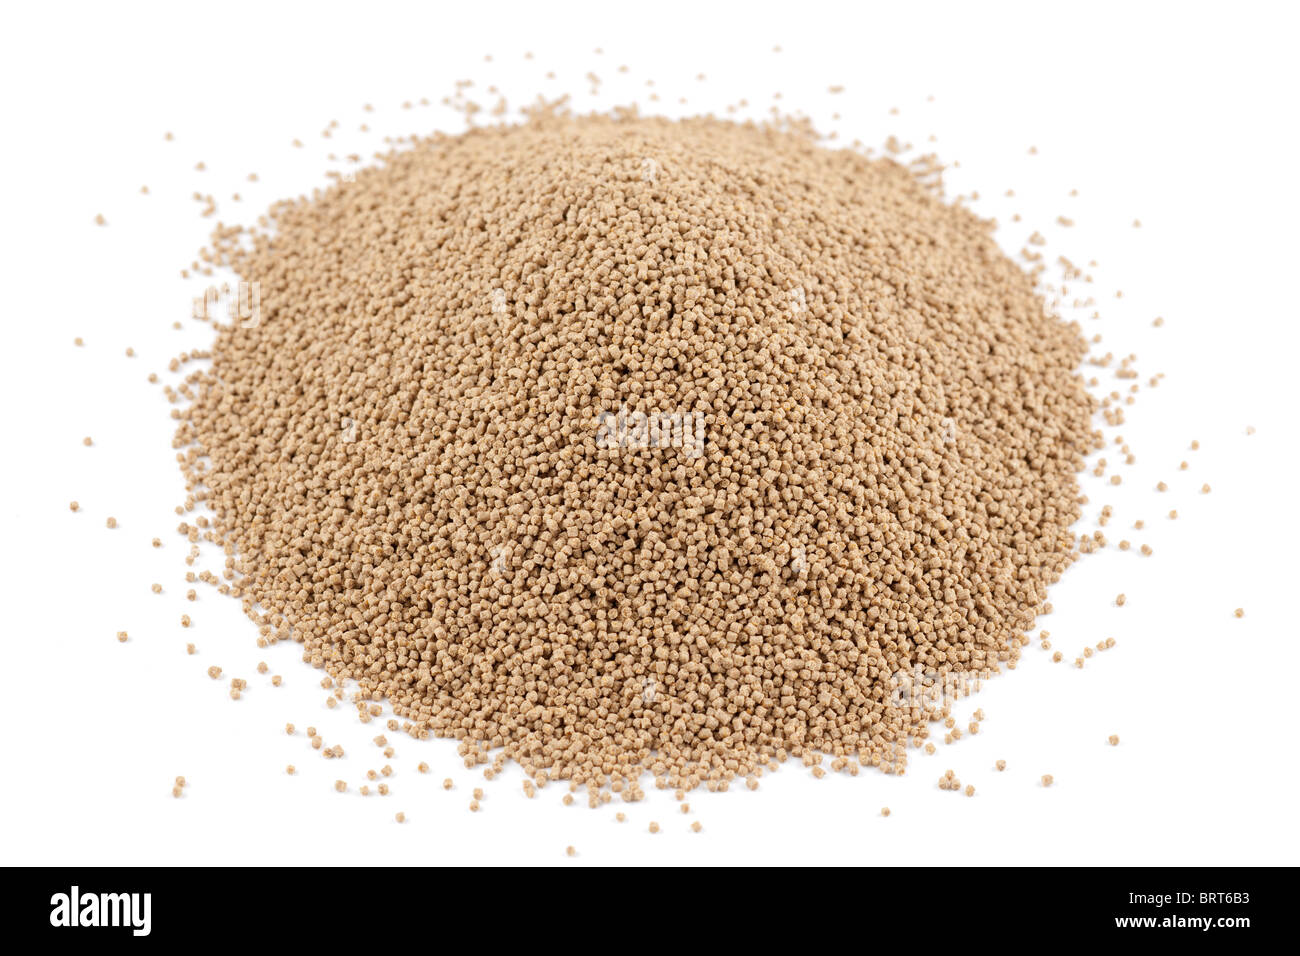 Pile of 1mm trout pellet feed Stock Photo